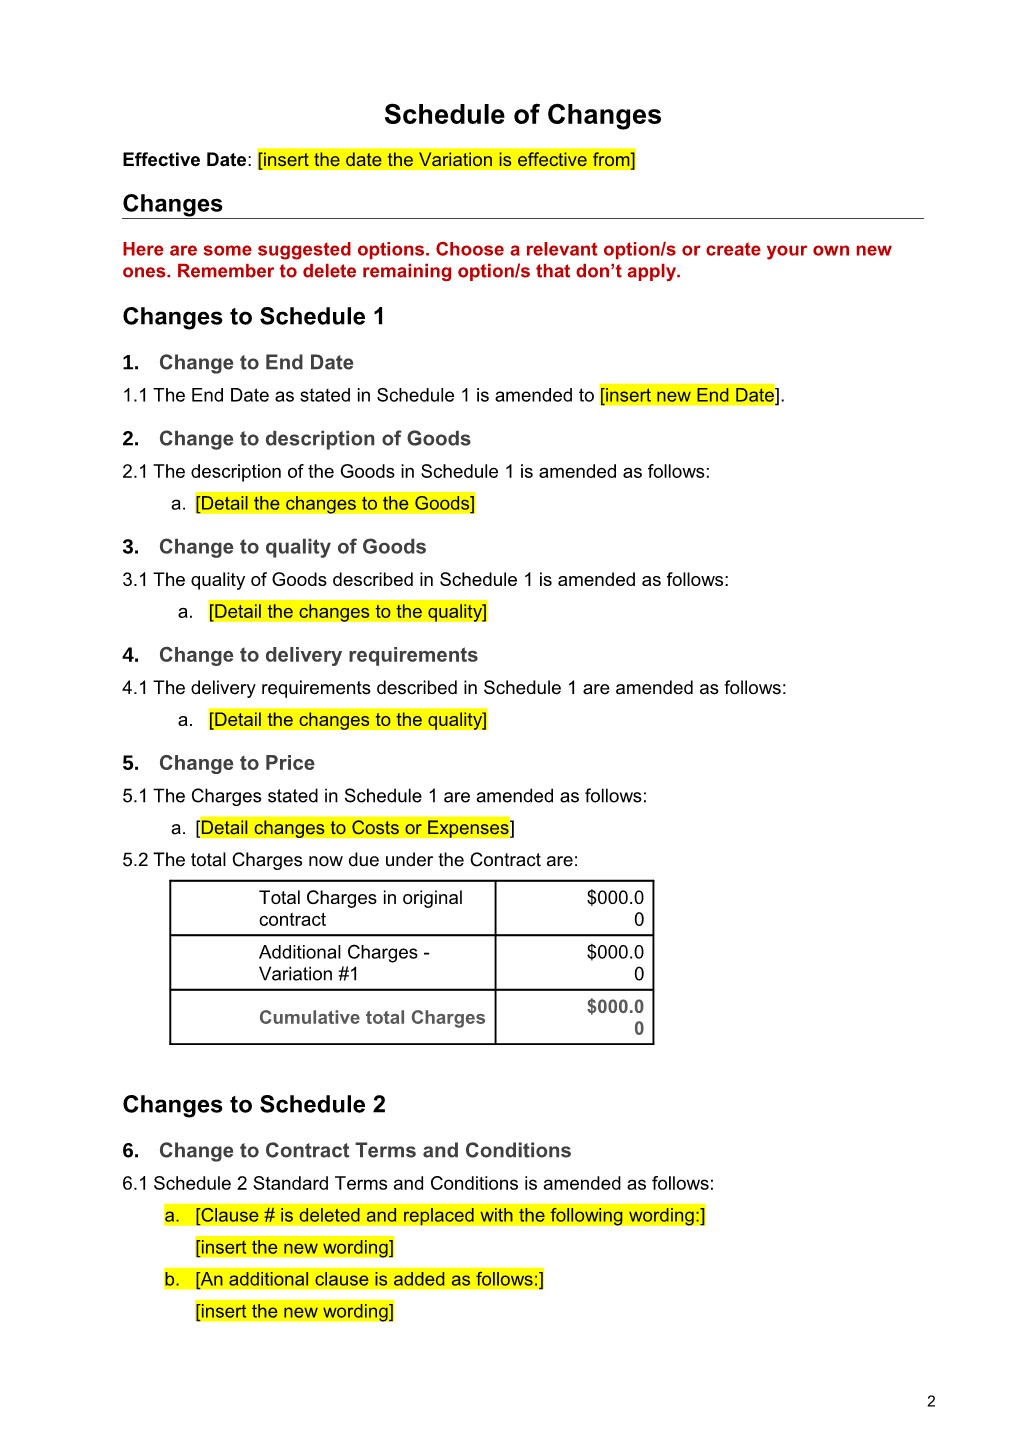 Government Model - Contract Variation - Goods Template